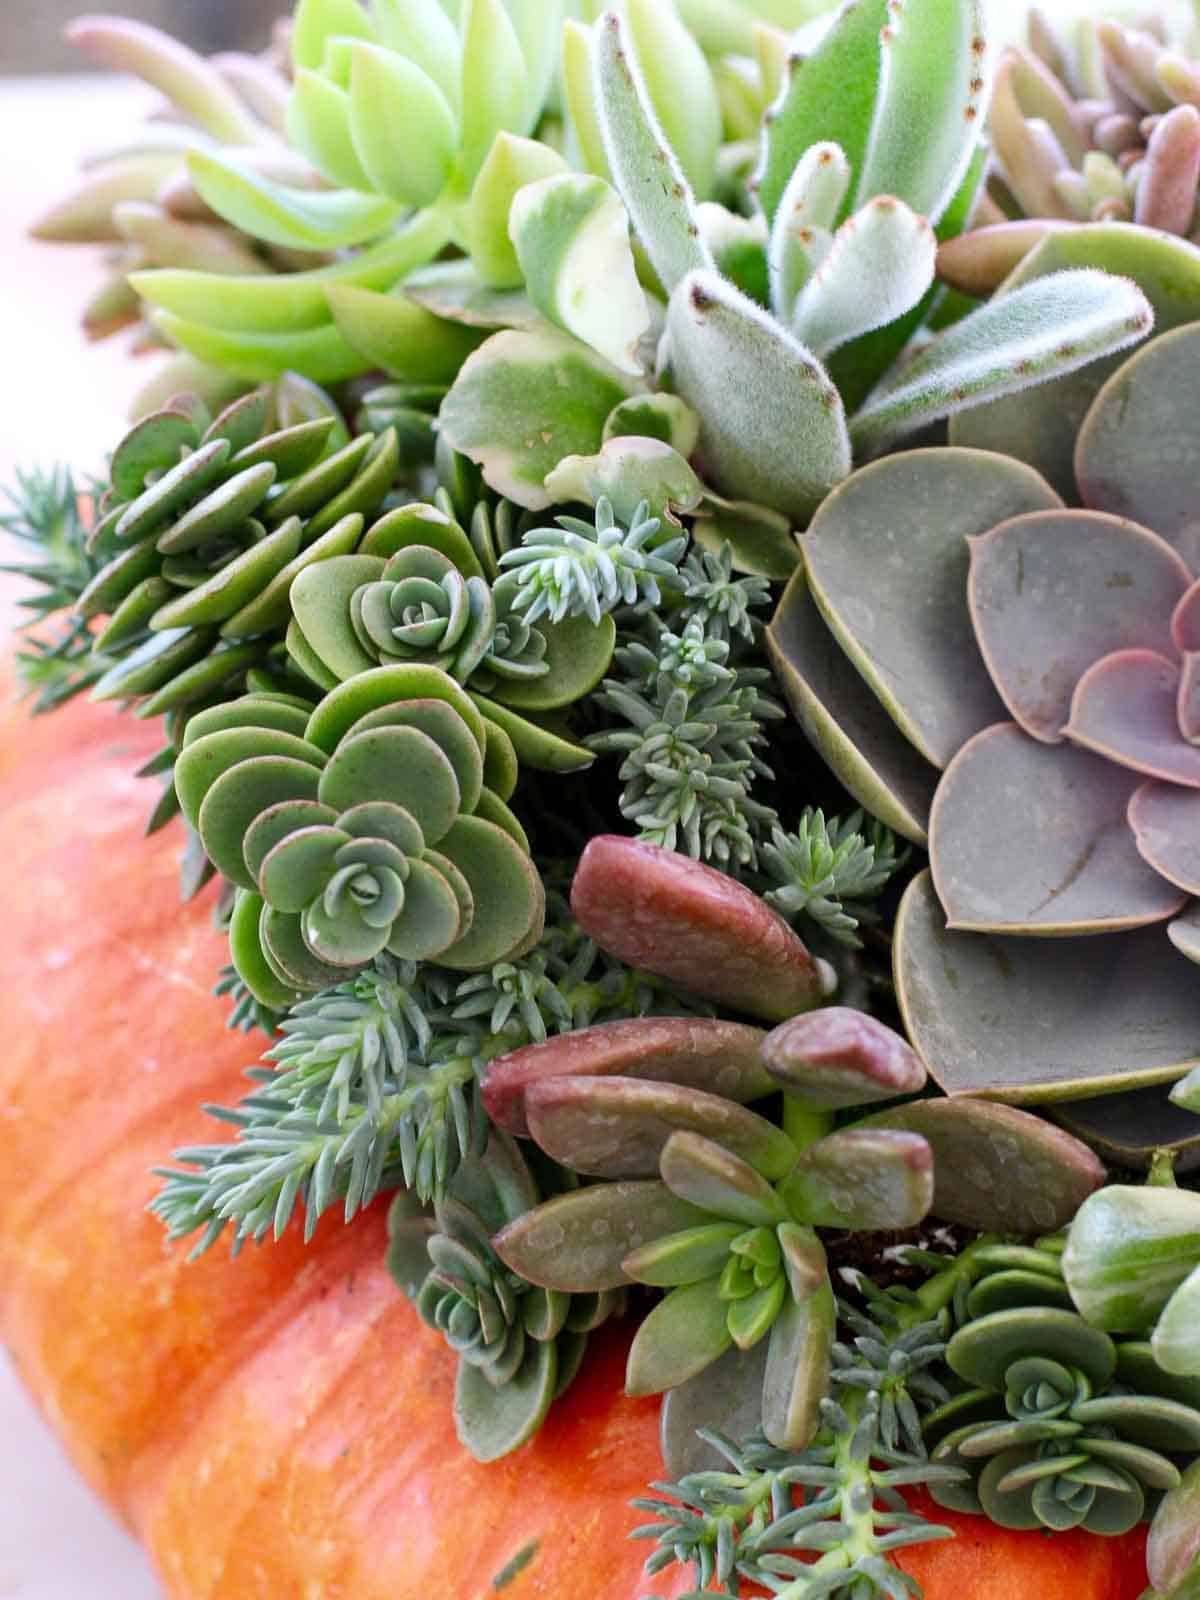 A bright orange pumpkin topped with different colored succulents for a Thanksgiving centerpiece.